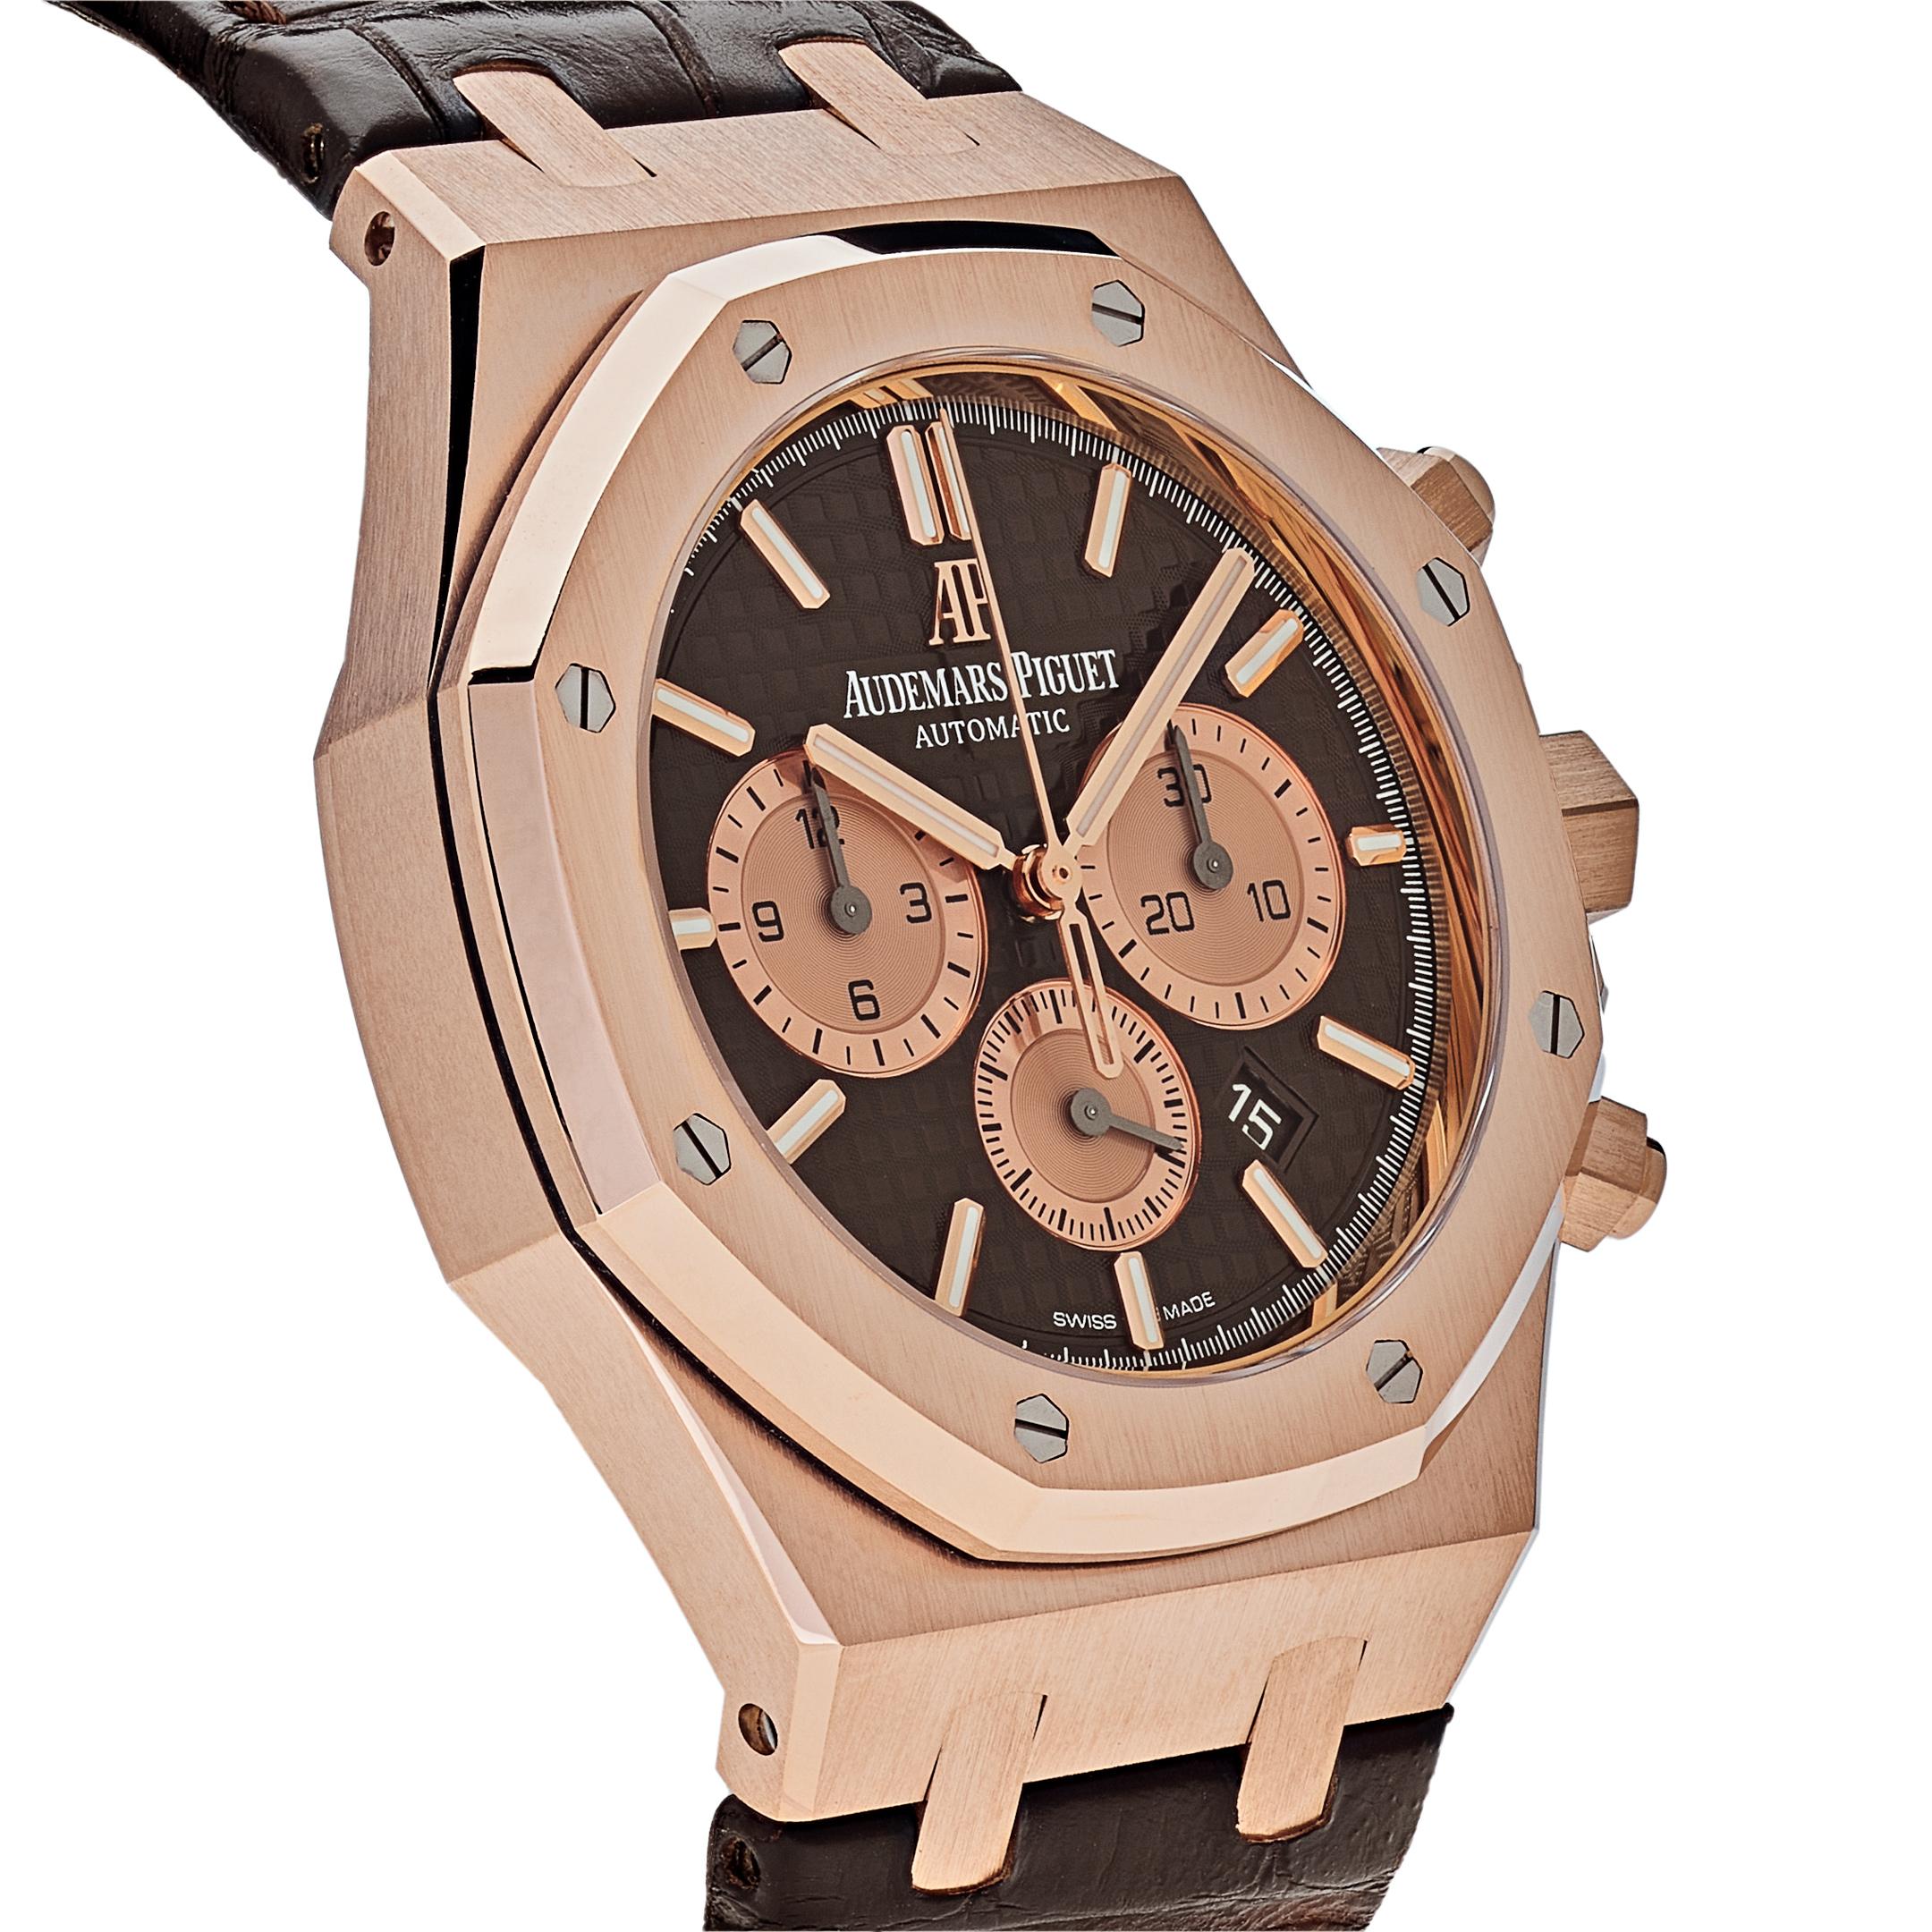 This Royal Oak Selfwinding Chronograph is designed in a 41mm 18-carat rose gold case and an octagonal bezel. It features the Grande Tapisserie pattern on the brown dial equipped with three rose gold-toned counters. The watch is complimented by a